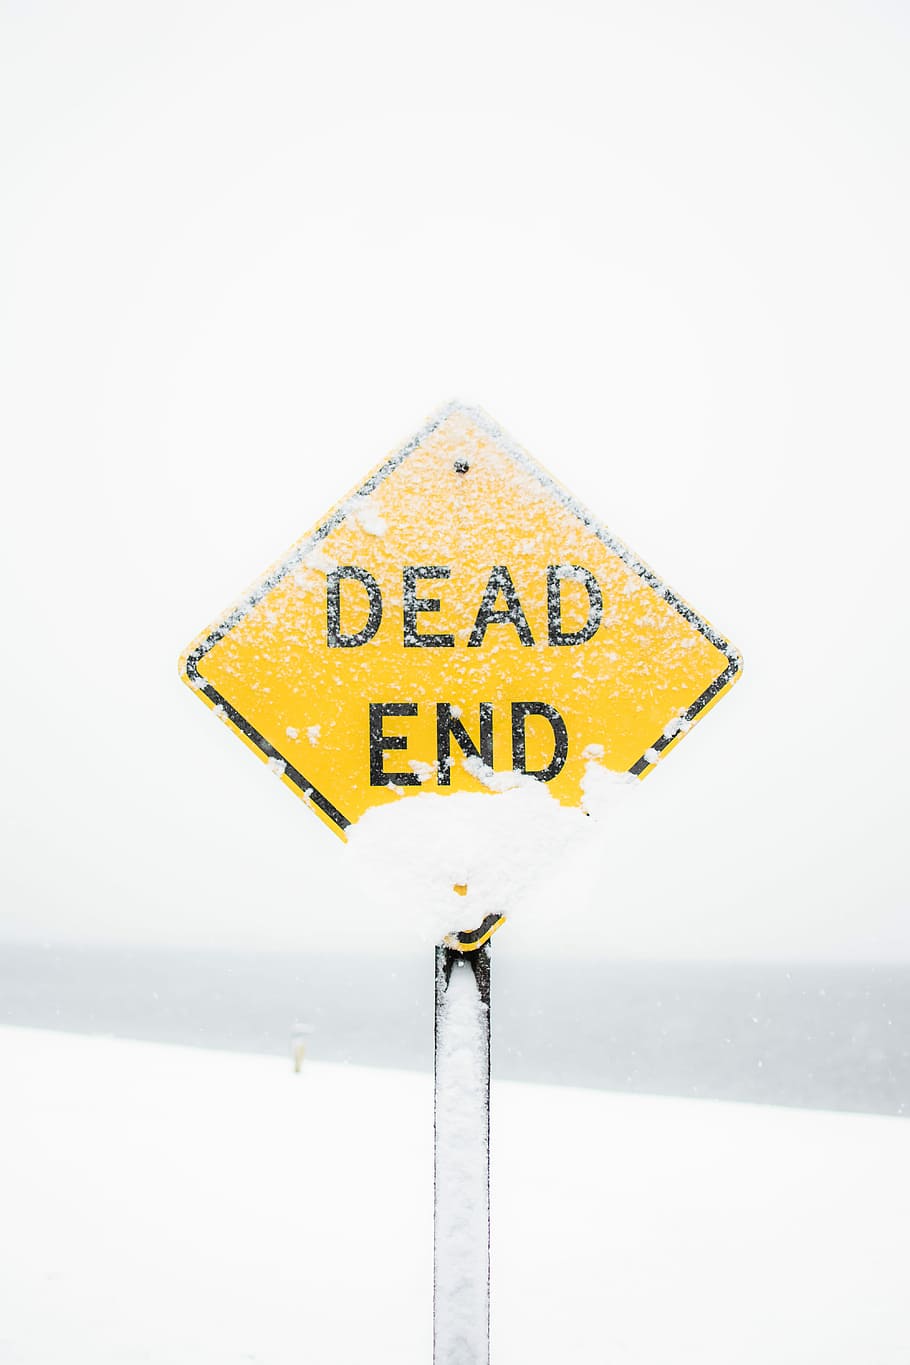 focus photography of dead end road sign covered with snow, snow-covered yellow and black Dead End street sign, HD wallpaper